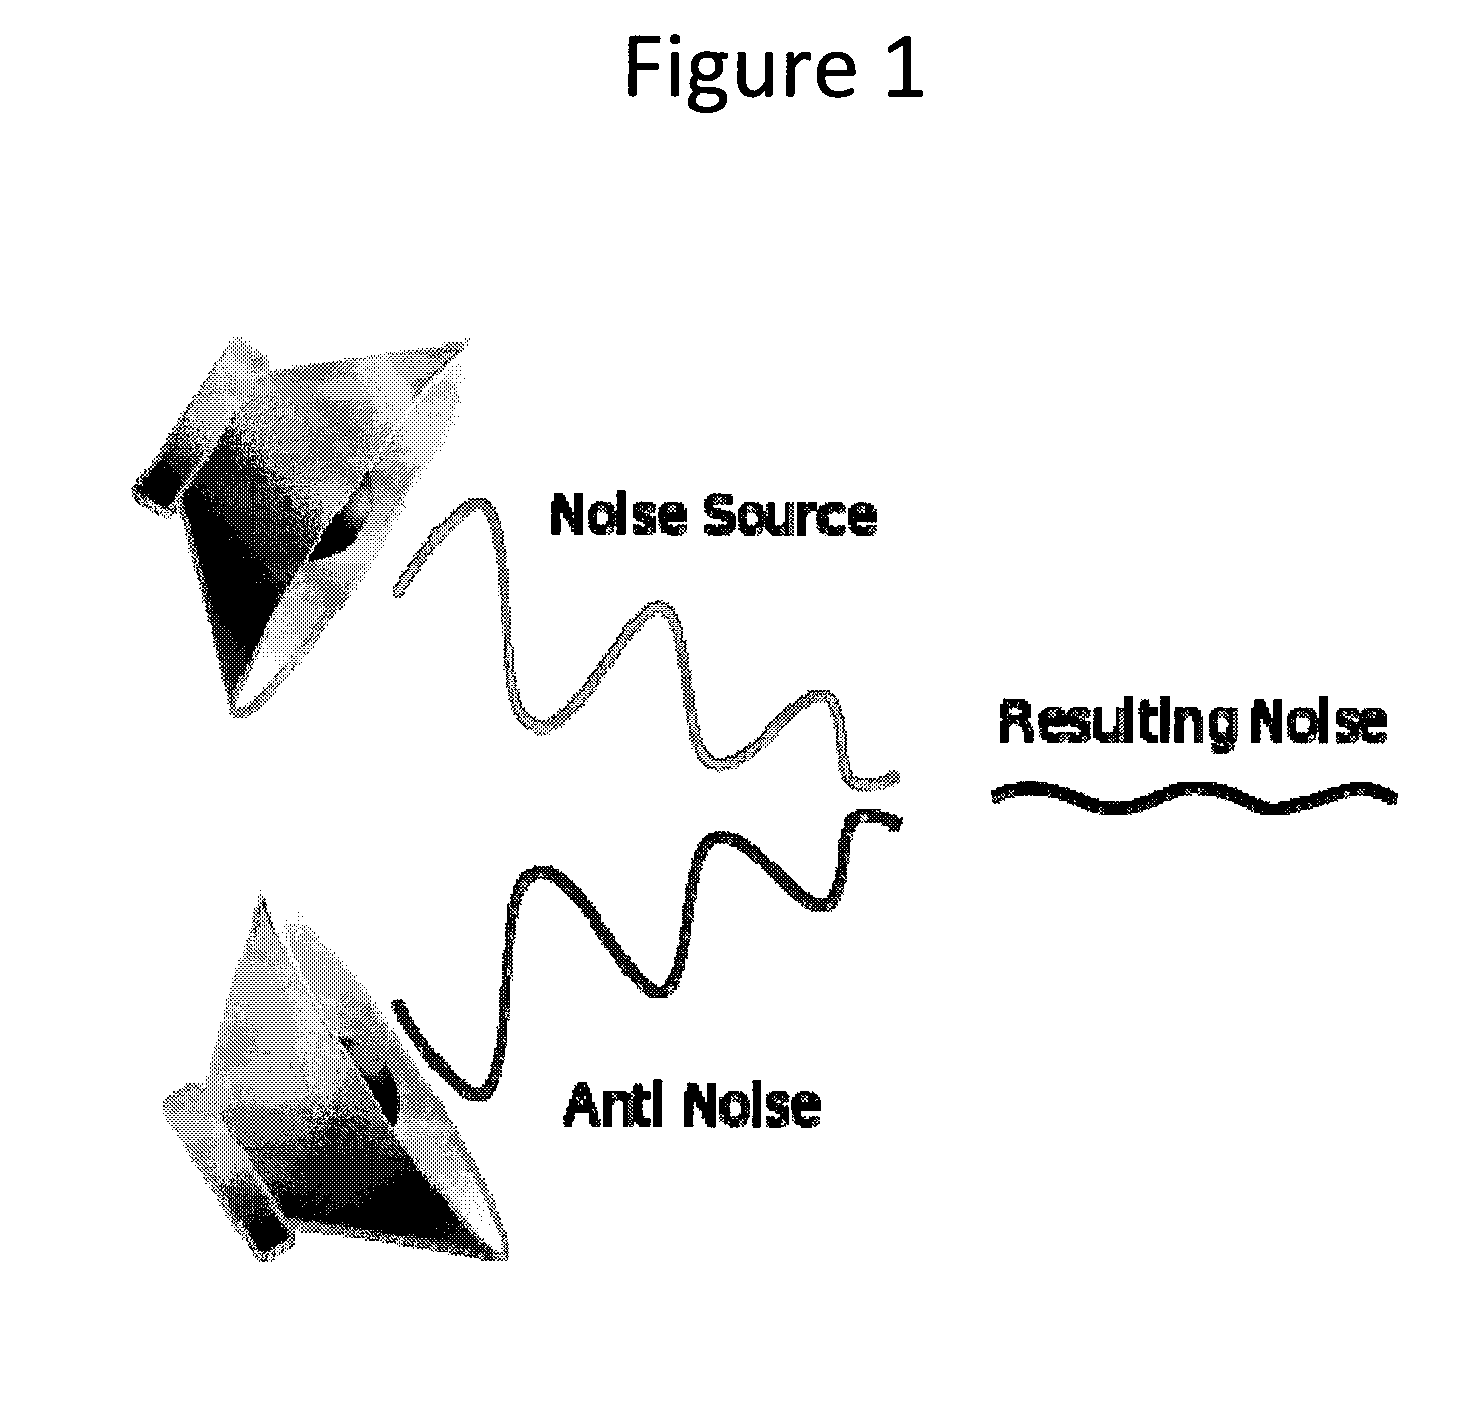 Active noise cancellation method for automobiles